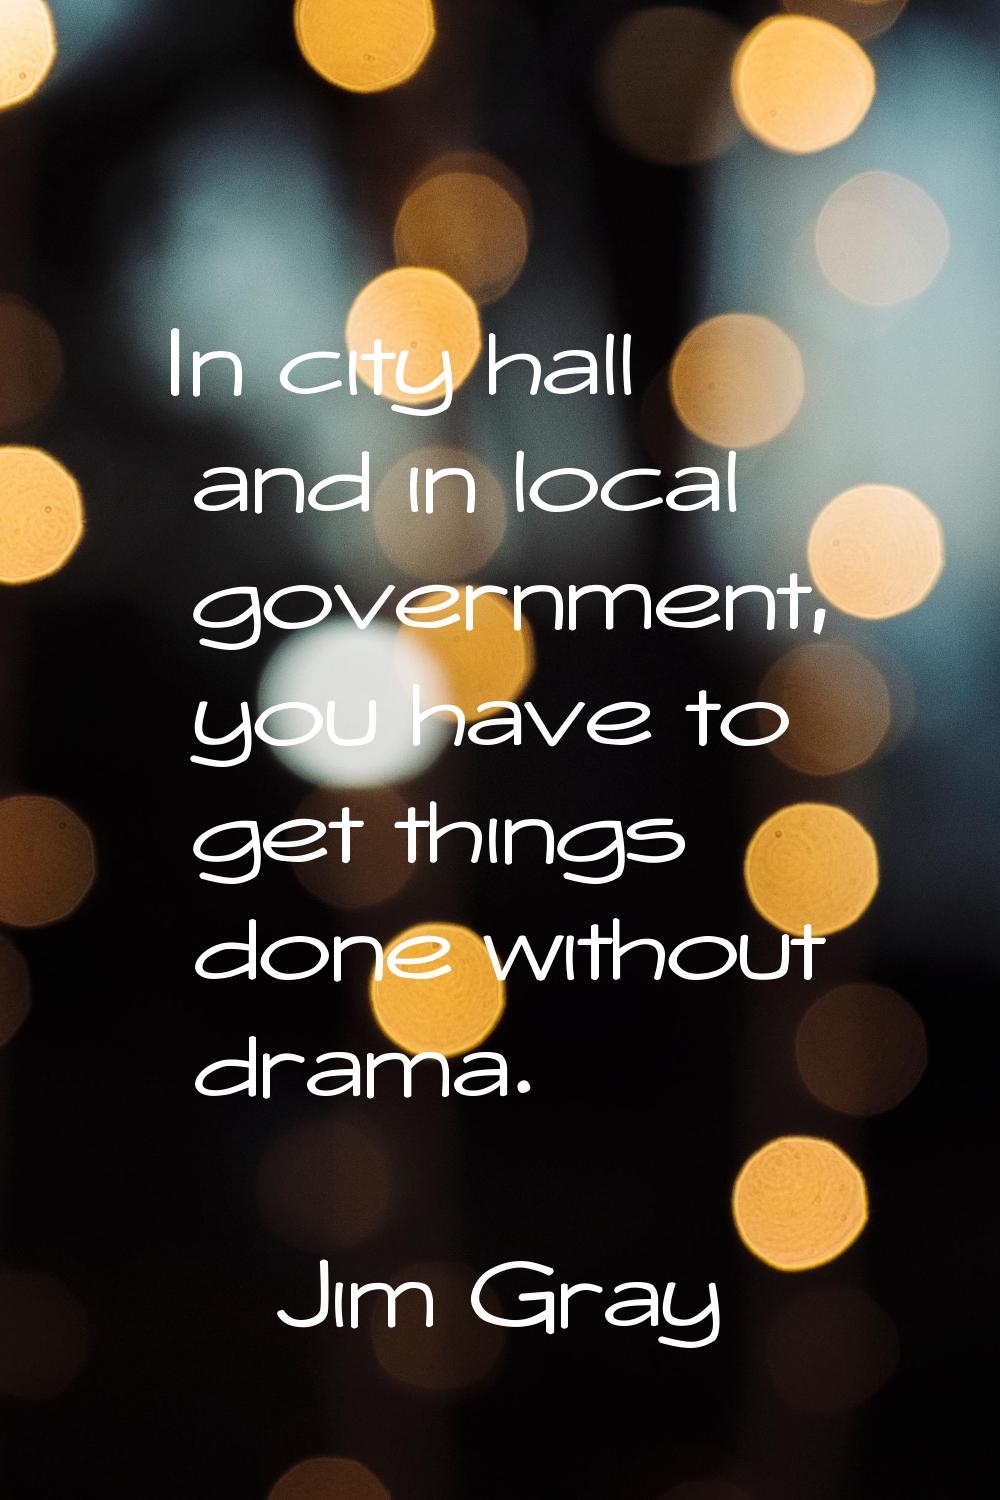 In city hall and in local government, you have to get things done without drama.